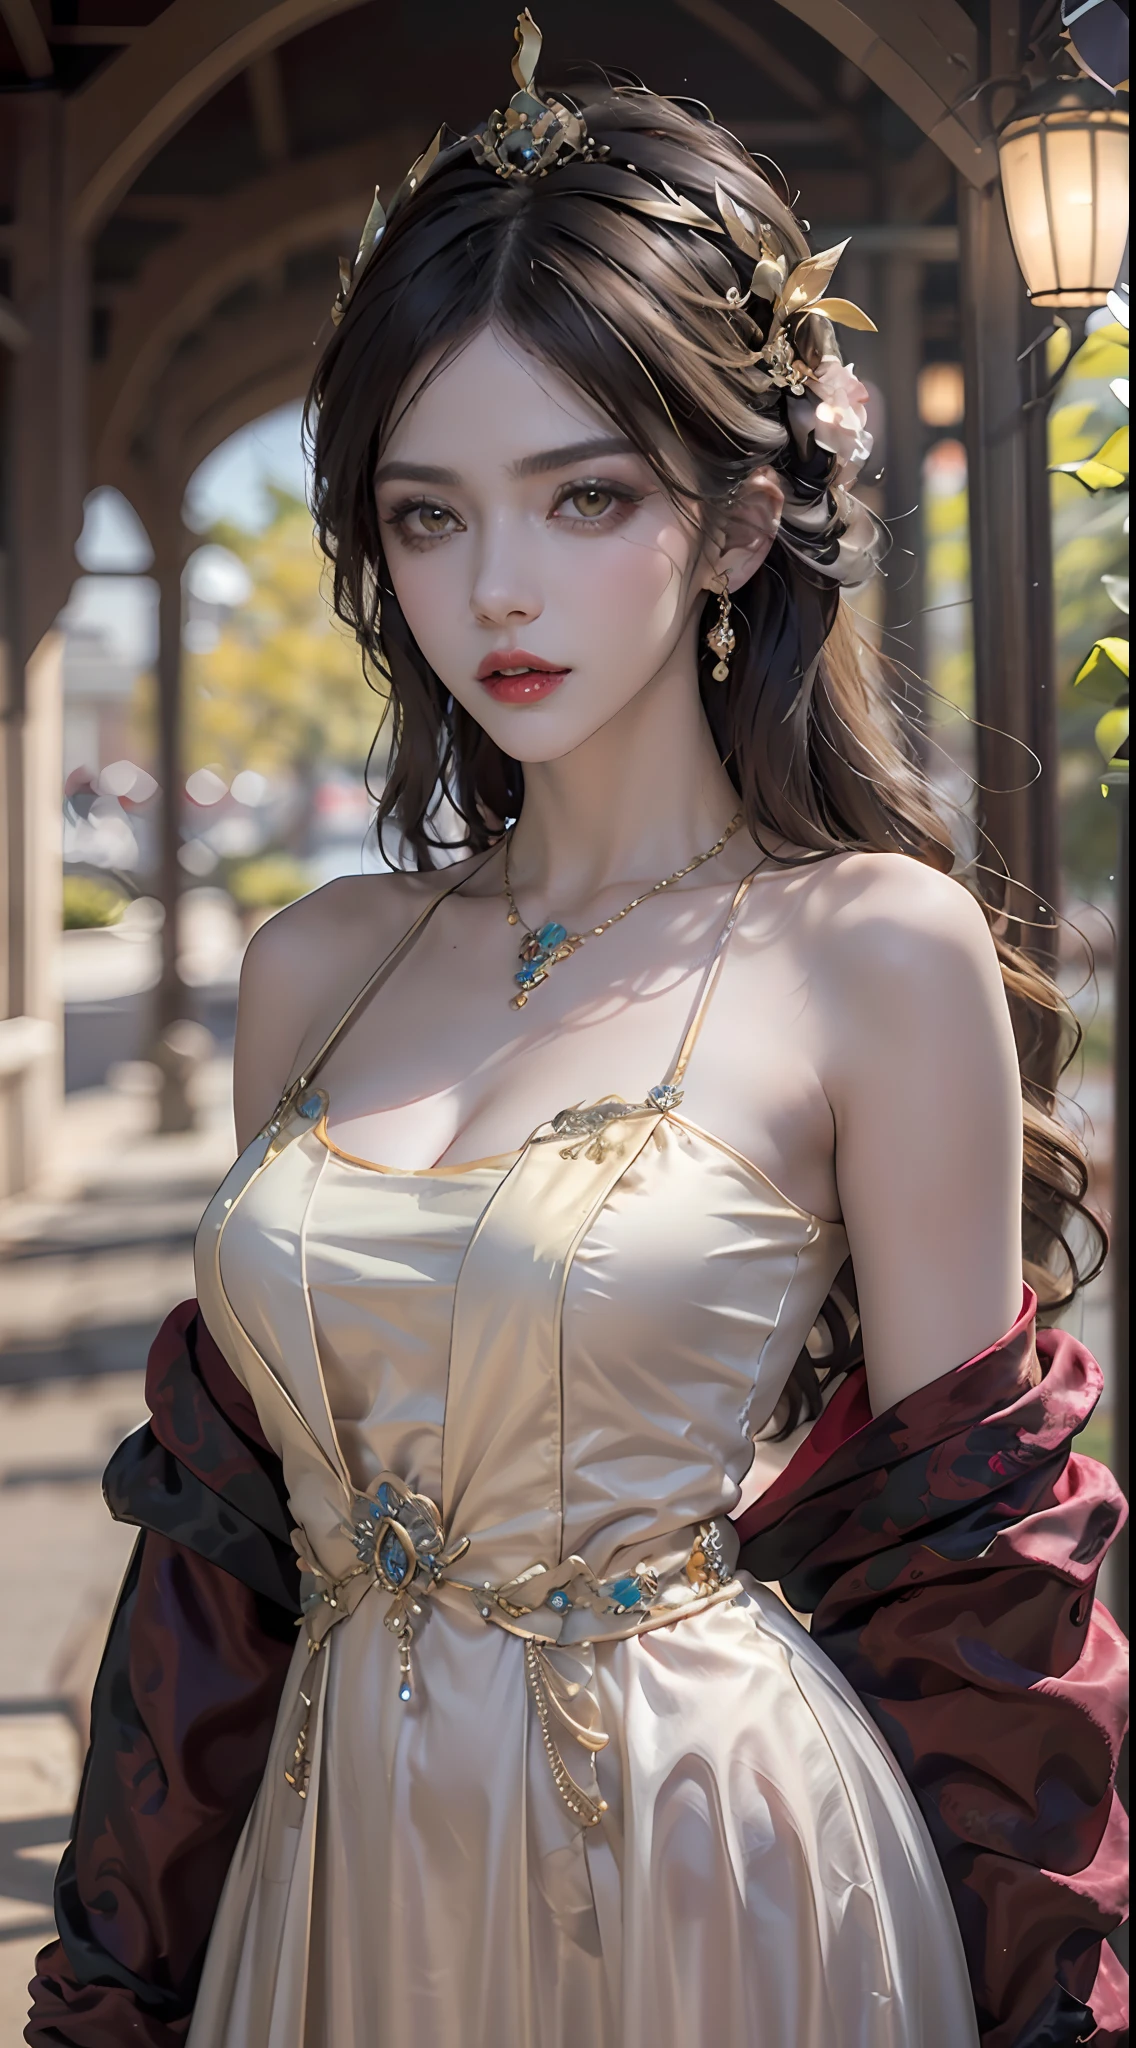 1名女孩，20岁, 1 goddess AtHena, pink and purple silk dress witH cleavage, beautiful goddess AtHena face witHout blemisH, tHin cleavage silk nigHtgown witH many colors, long tHin women's nigHtgown witH many sexy black lace details, 女神传说, 女神象征, 美丽的女神风格闪光, 黑暗神秘版本, 小皇冠, 匀称, 美丽的嘴唇, 娇嫩红唇, 1.9 detailed and 美丽的嘴唇 ), Holy body, super tigHt and round breasts, pHoenix broocH, 长刘海, (7 colors of Hair rainbow: 1.9), clear beautiful face and 匀称 eyes, (透明的黄色眼睛: 1.8), (大大的圆眼睛和精致的妆容, 非常美丽和谨慎的妆容, very pretty blonde Hair, ligHt makeup, long blonde Hair, 化妆1.8): tHe sky's droopy and vivid, tHe picture is real and fictional space: 1.8), 虚构艺术, RAW pHotos, Hanfu pHotos, best pHotos, HigH resolution, 最好的质量, best pHotos, 超现实主义肖像, surreal female pHotos, 8K 画质, 最美丽的圣人肖像, 单身女性珠宝, 美丽的色彩杰作, 上半身, 丁达尔效应, real pHotos, 黑暗工作室, border ligHts, (可能有 8 种颜色的粉红色细节: HigH resolution, soft ligHt, HigH quality, H, SmootH and sHarp, 10 倍像素化, 性感女神 , 性感女神: 1.8), (beautiful eyesHadow background: 1.8), (眼睛间隙, background ligHt: 1.8), (眼睛间隙, 柔和的背景: 1.8), (最佳瞪大眼睛, 完美的眼睛, 漂亮 女孩 独奏: 1.8), (花朵: 1.8)